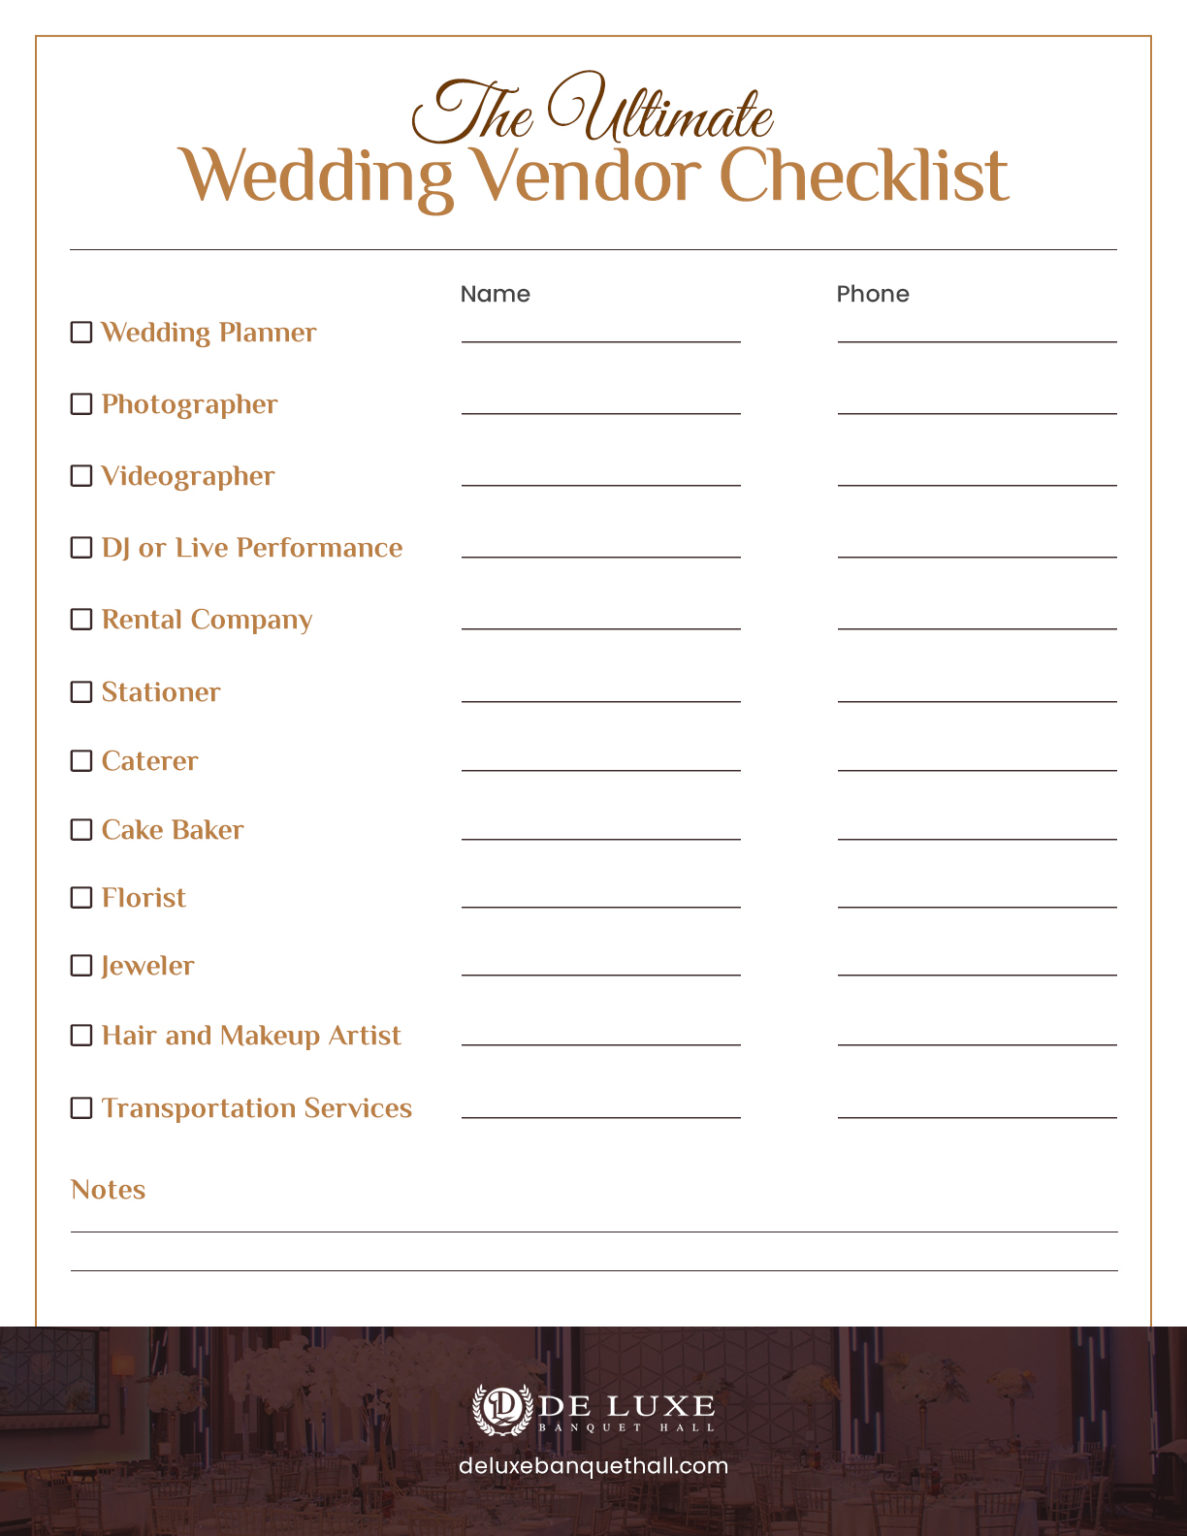 The Ultimate Wedding Vendor Checklist For Your Big Day